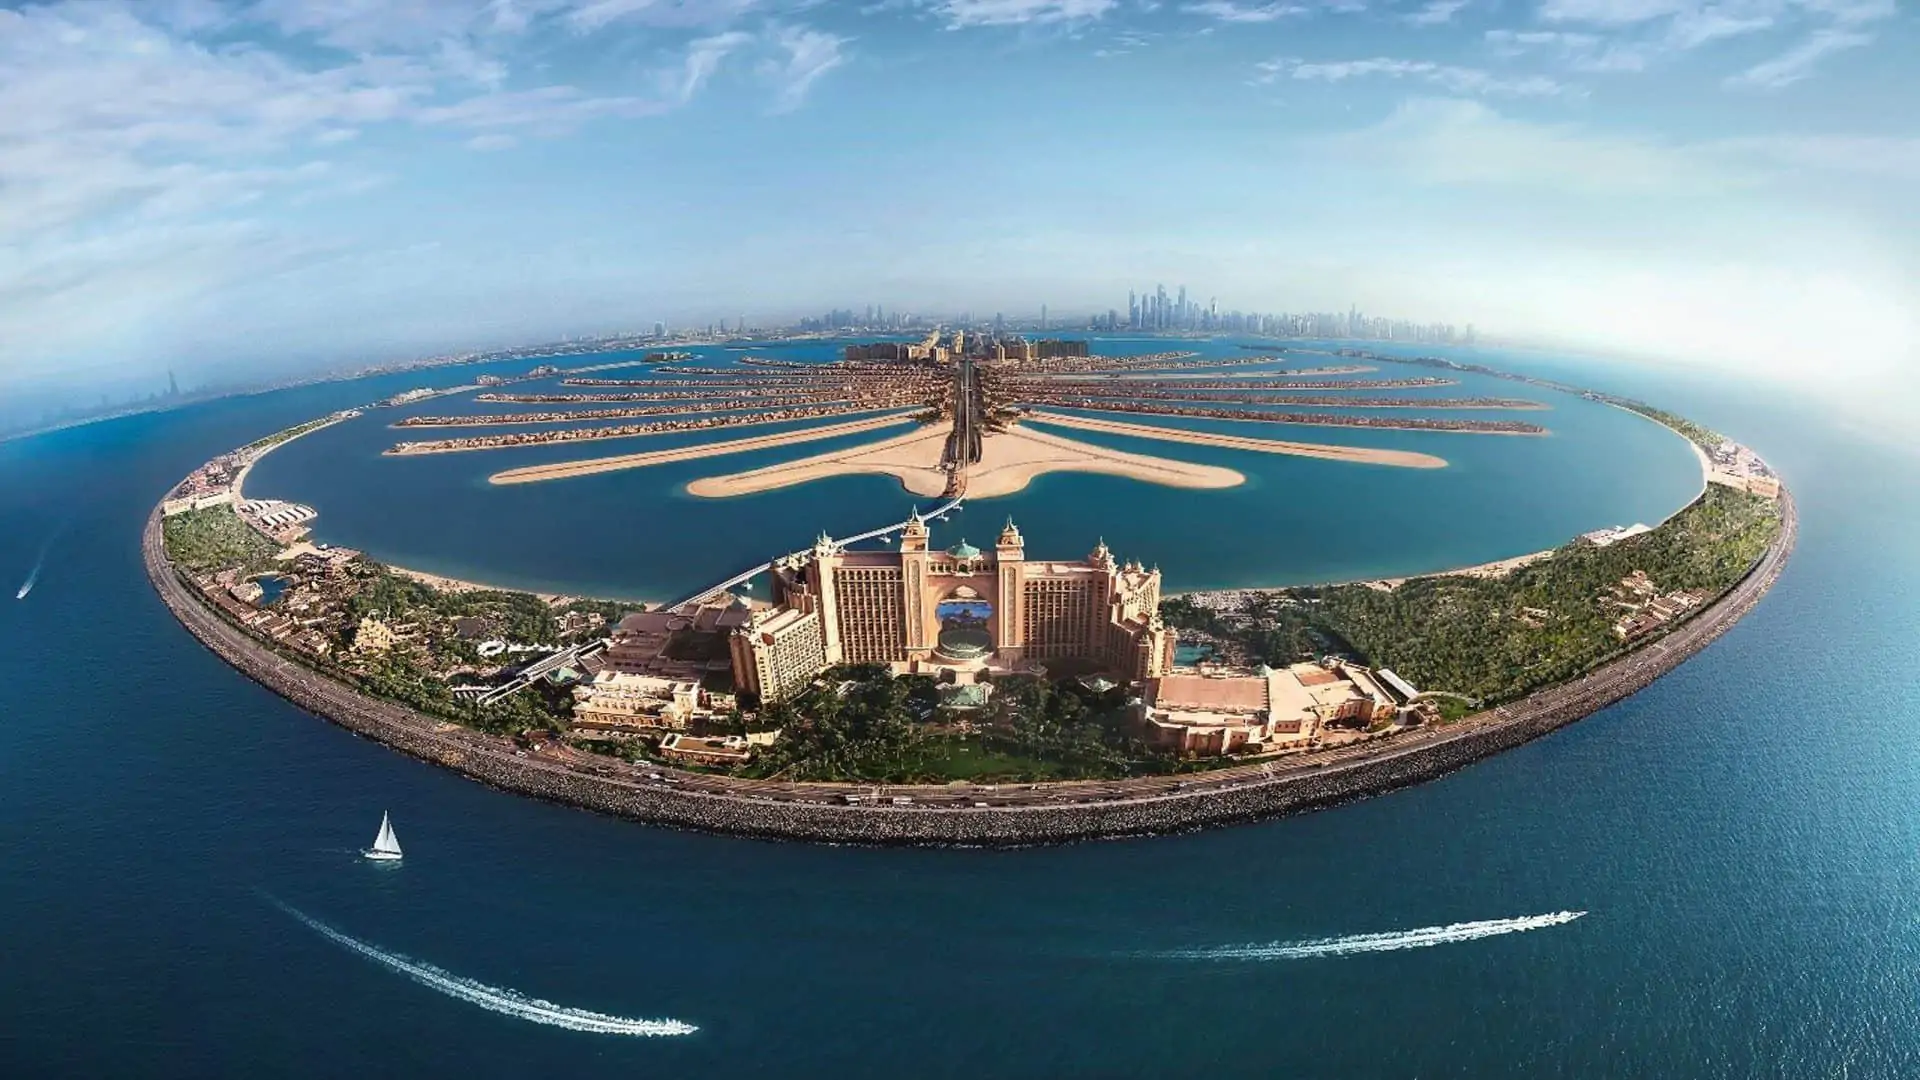  Let's Make this Summer memorable with Dubai Delight! 06 Nights of Atlantis, The Palm with Half Board just in £1799pp